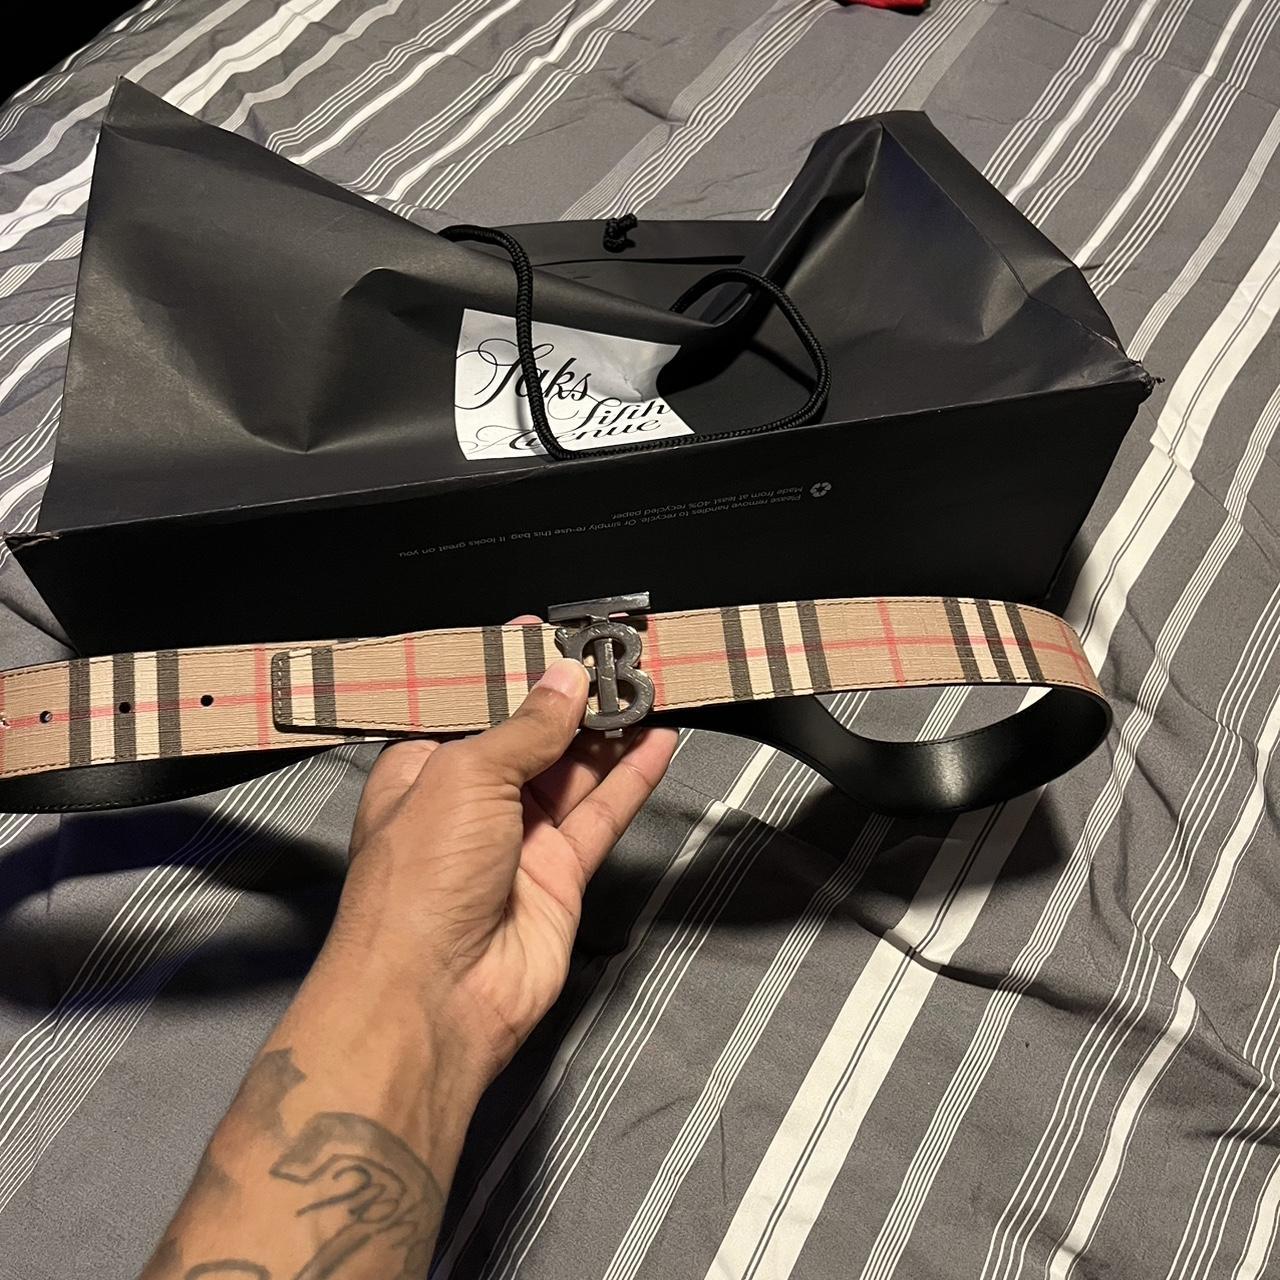 authentic burberry gold belt retail $489 selling for - Depop